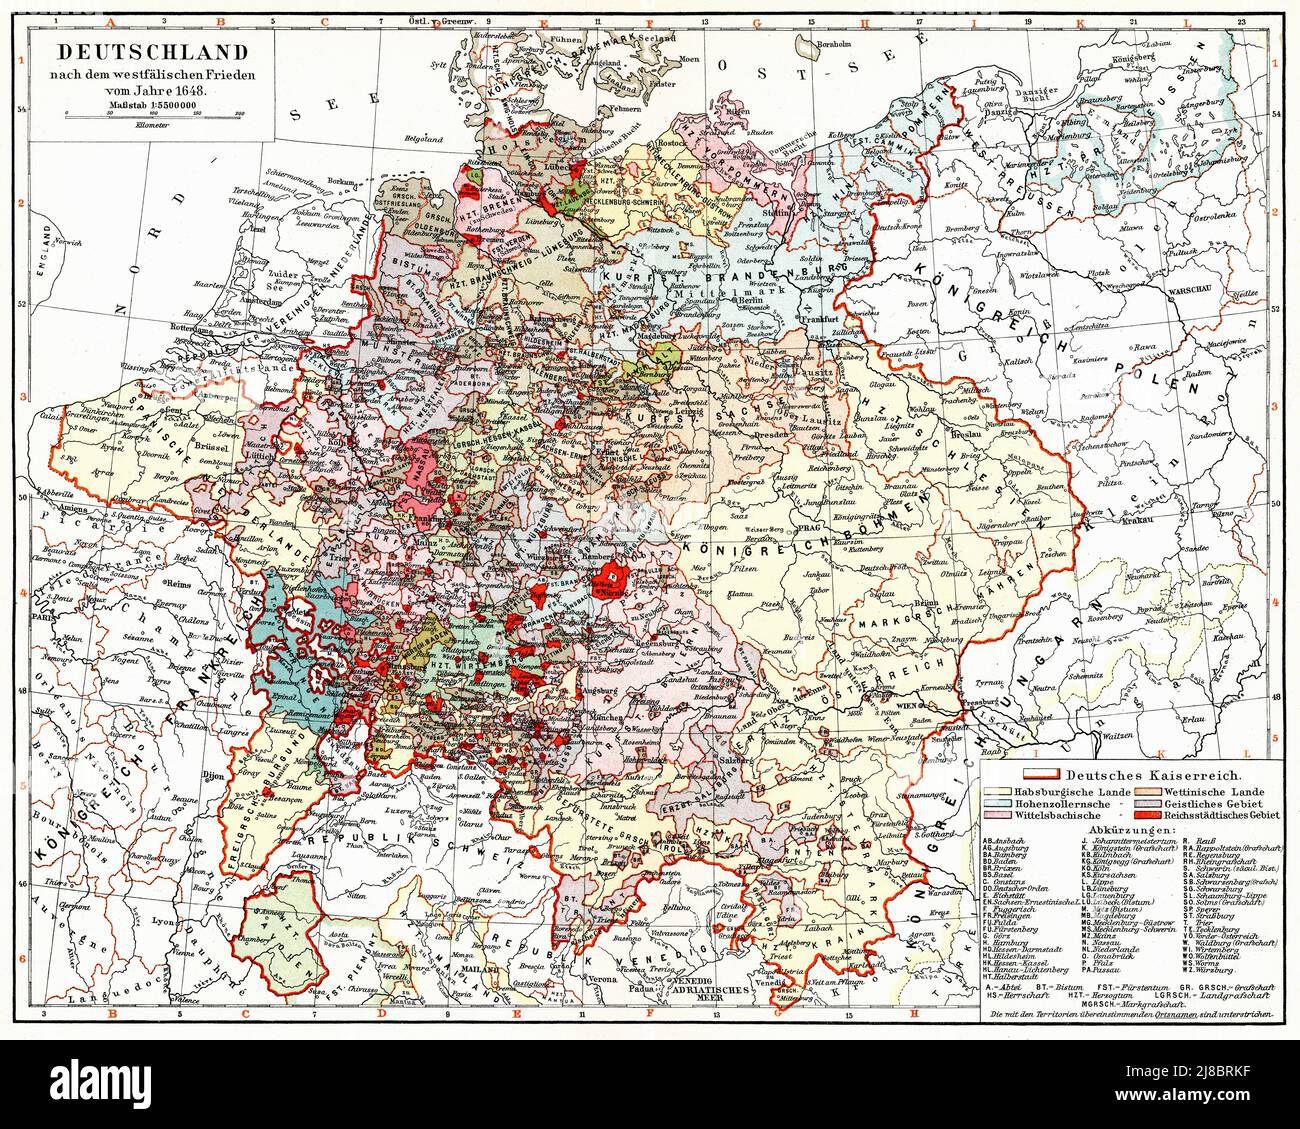 Map of Germany after the Peace of Westphalia of 1648. Publication of the book 'Meyers Konversations-Lexikon', Volume 2, Leipzig, Germany, 1910 Stock Photo